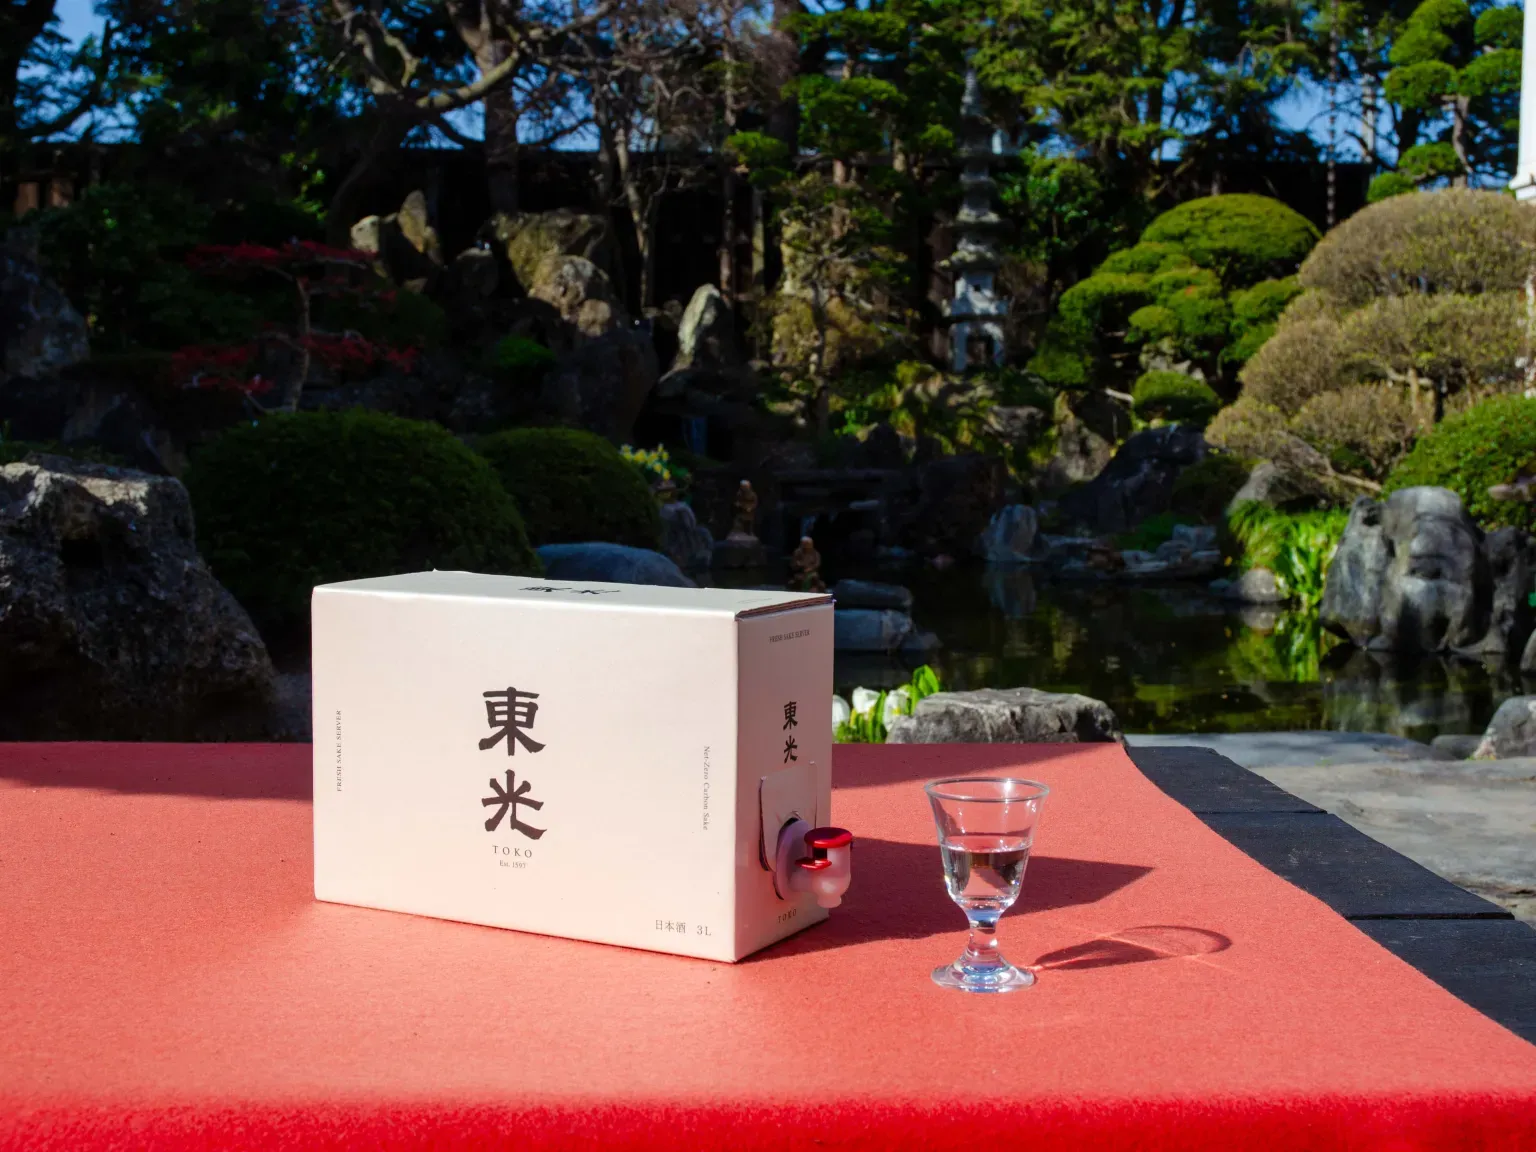 Boxed sake has become popular in Japan, thanks to one of the country's oldest breweries.